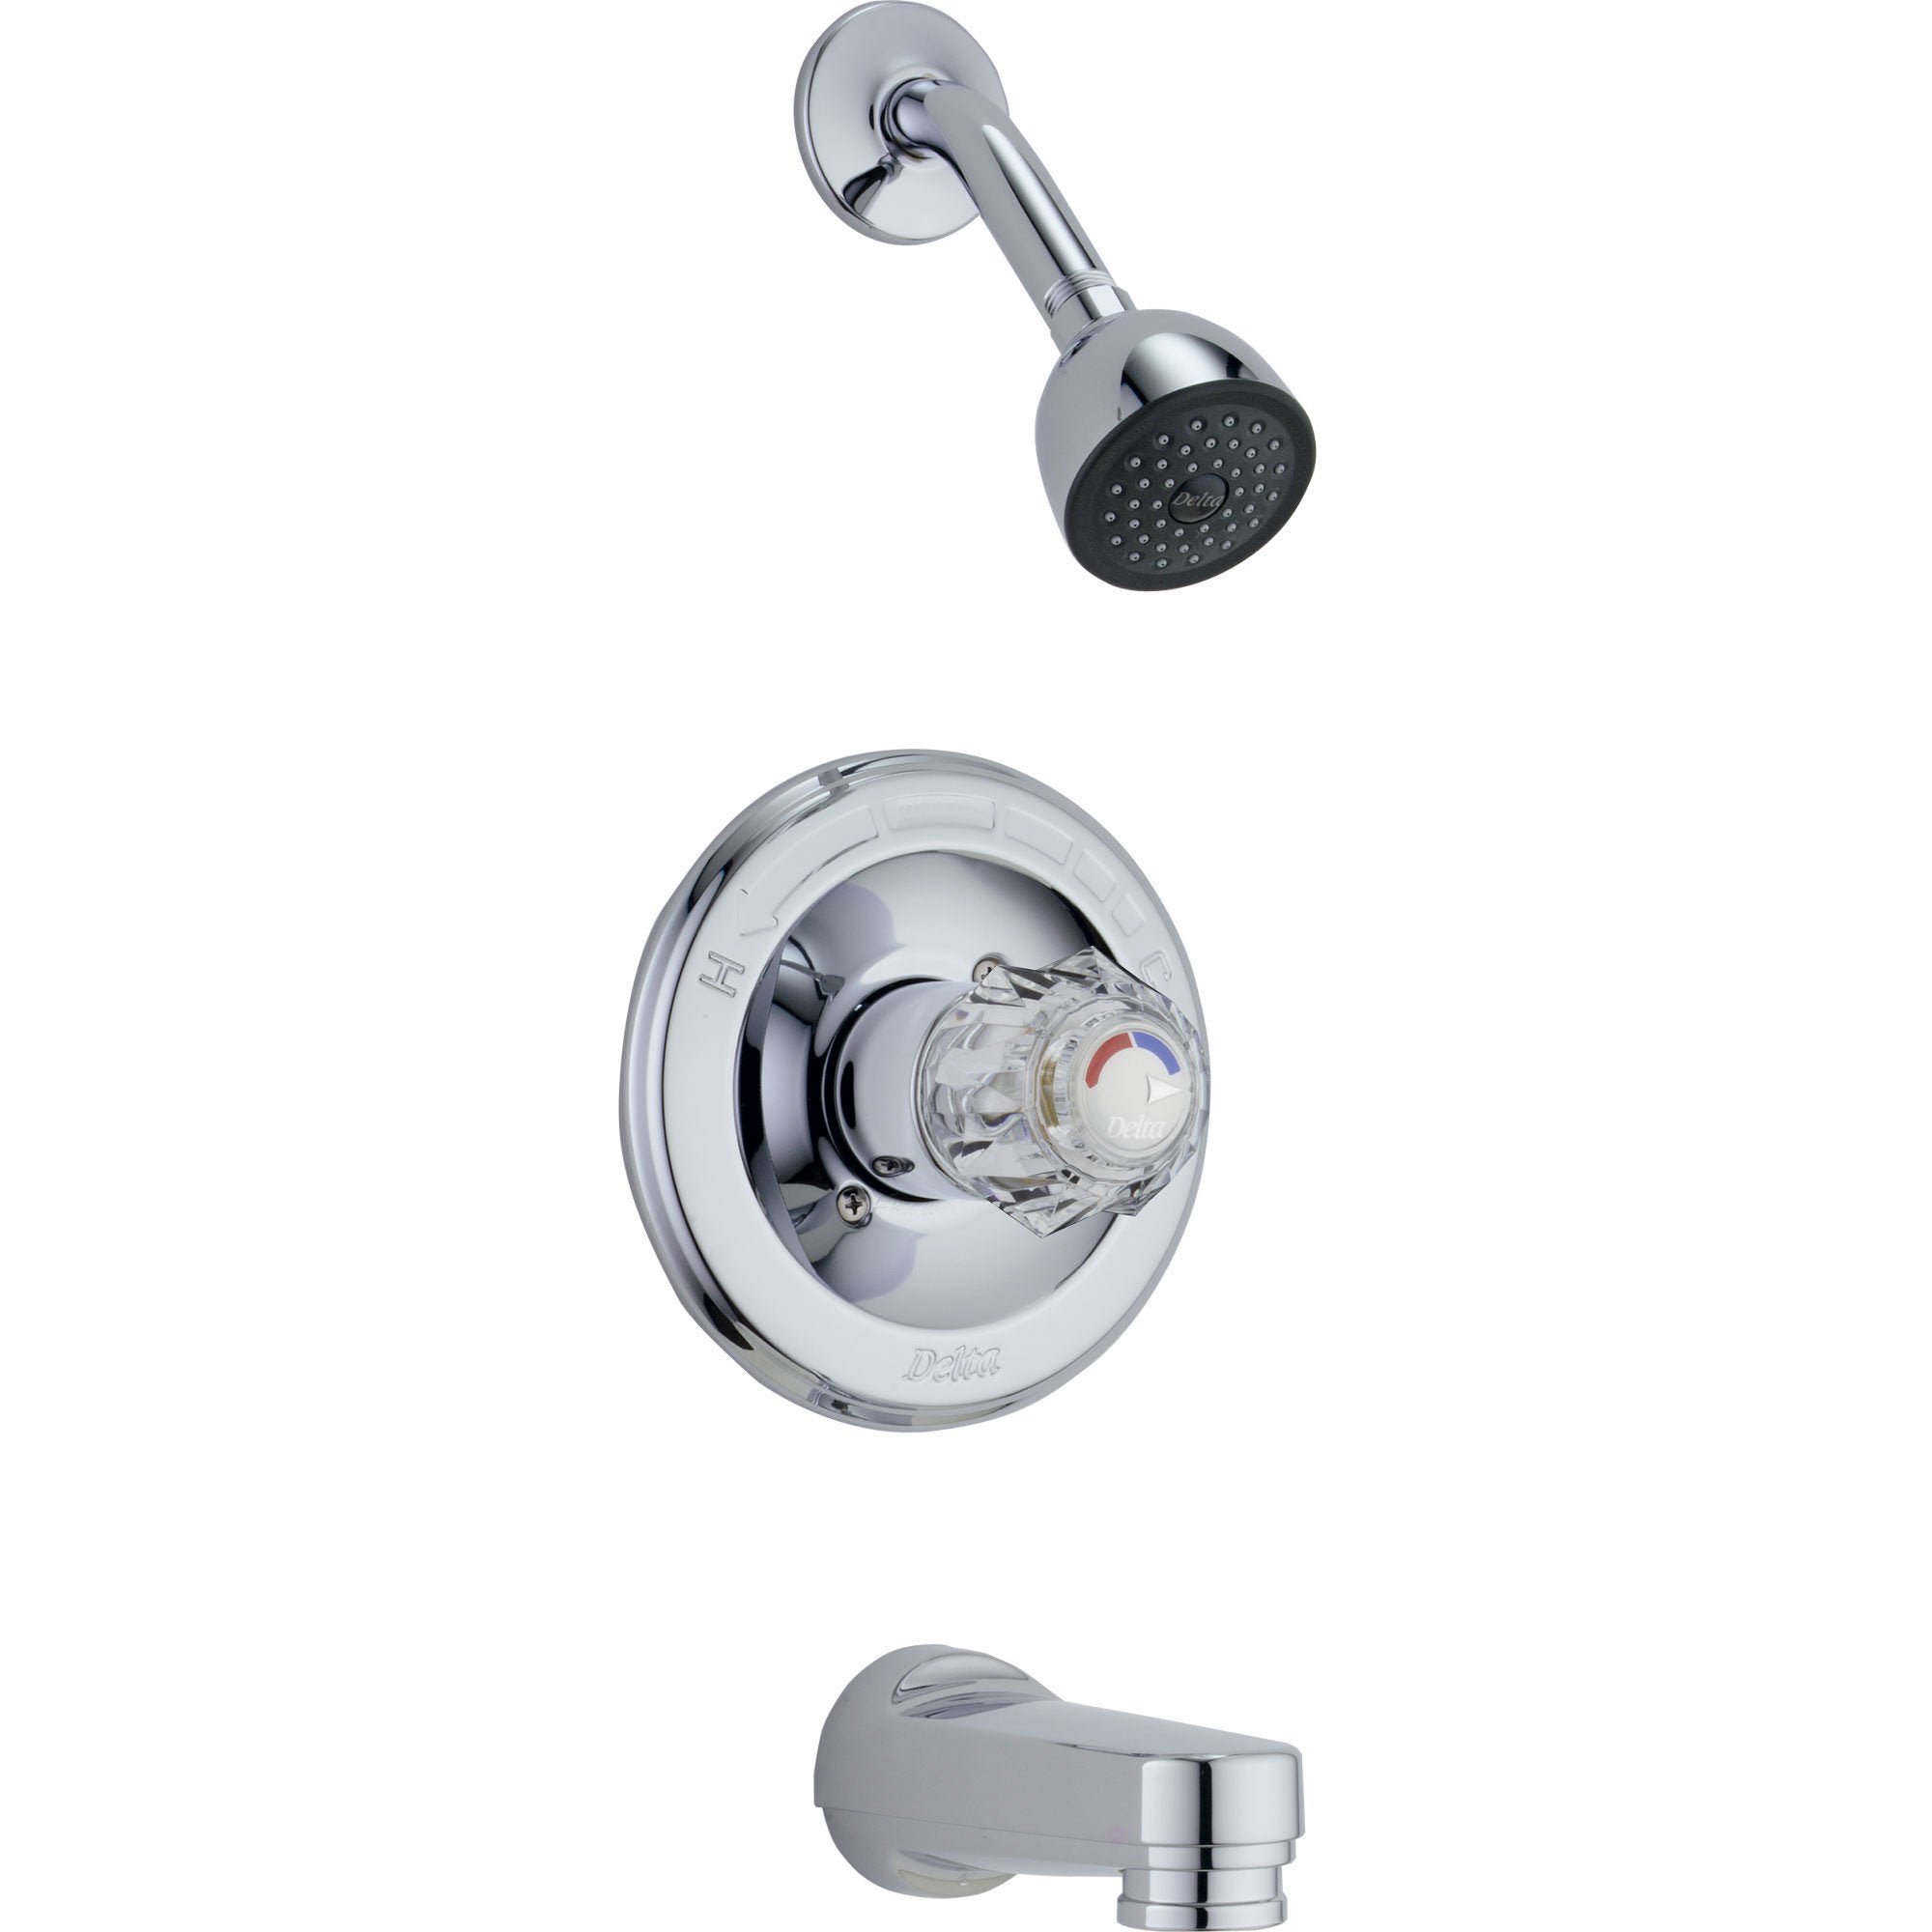 Delta Classic Chrome Single Control Knob Tub and Shower Faucet with Valve D304V